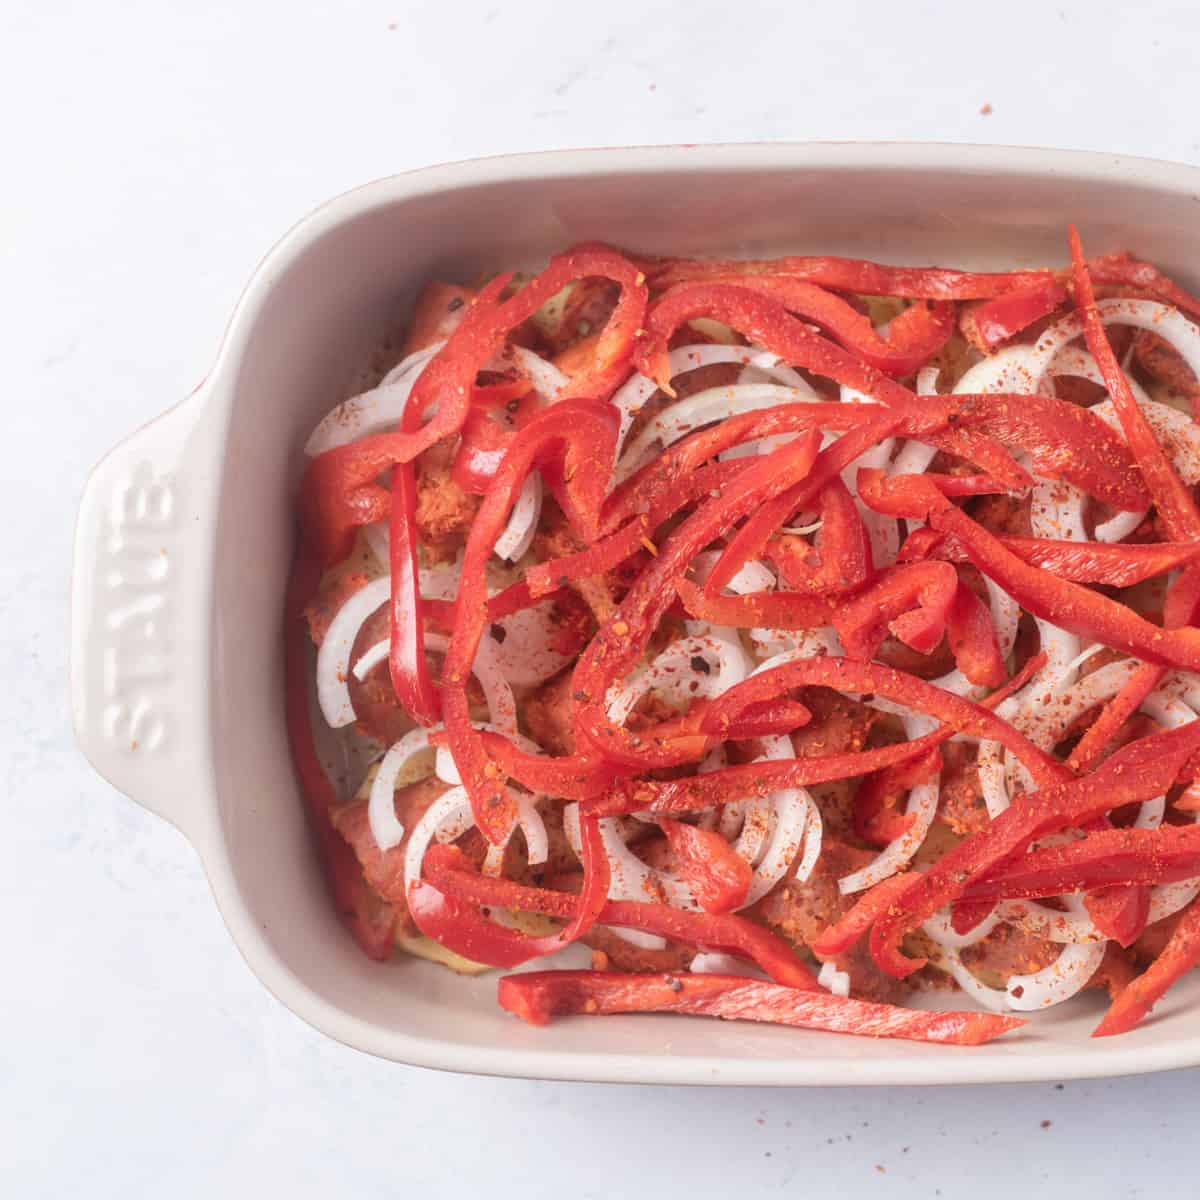 Layers of potatoes, sausage, onions and red peppers and sprinkles of red pepper flakes,in small baking dish